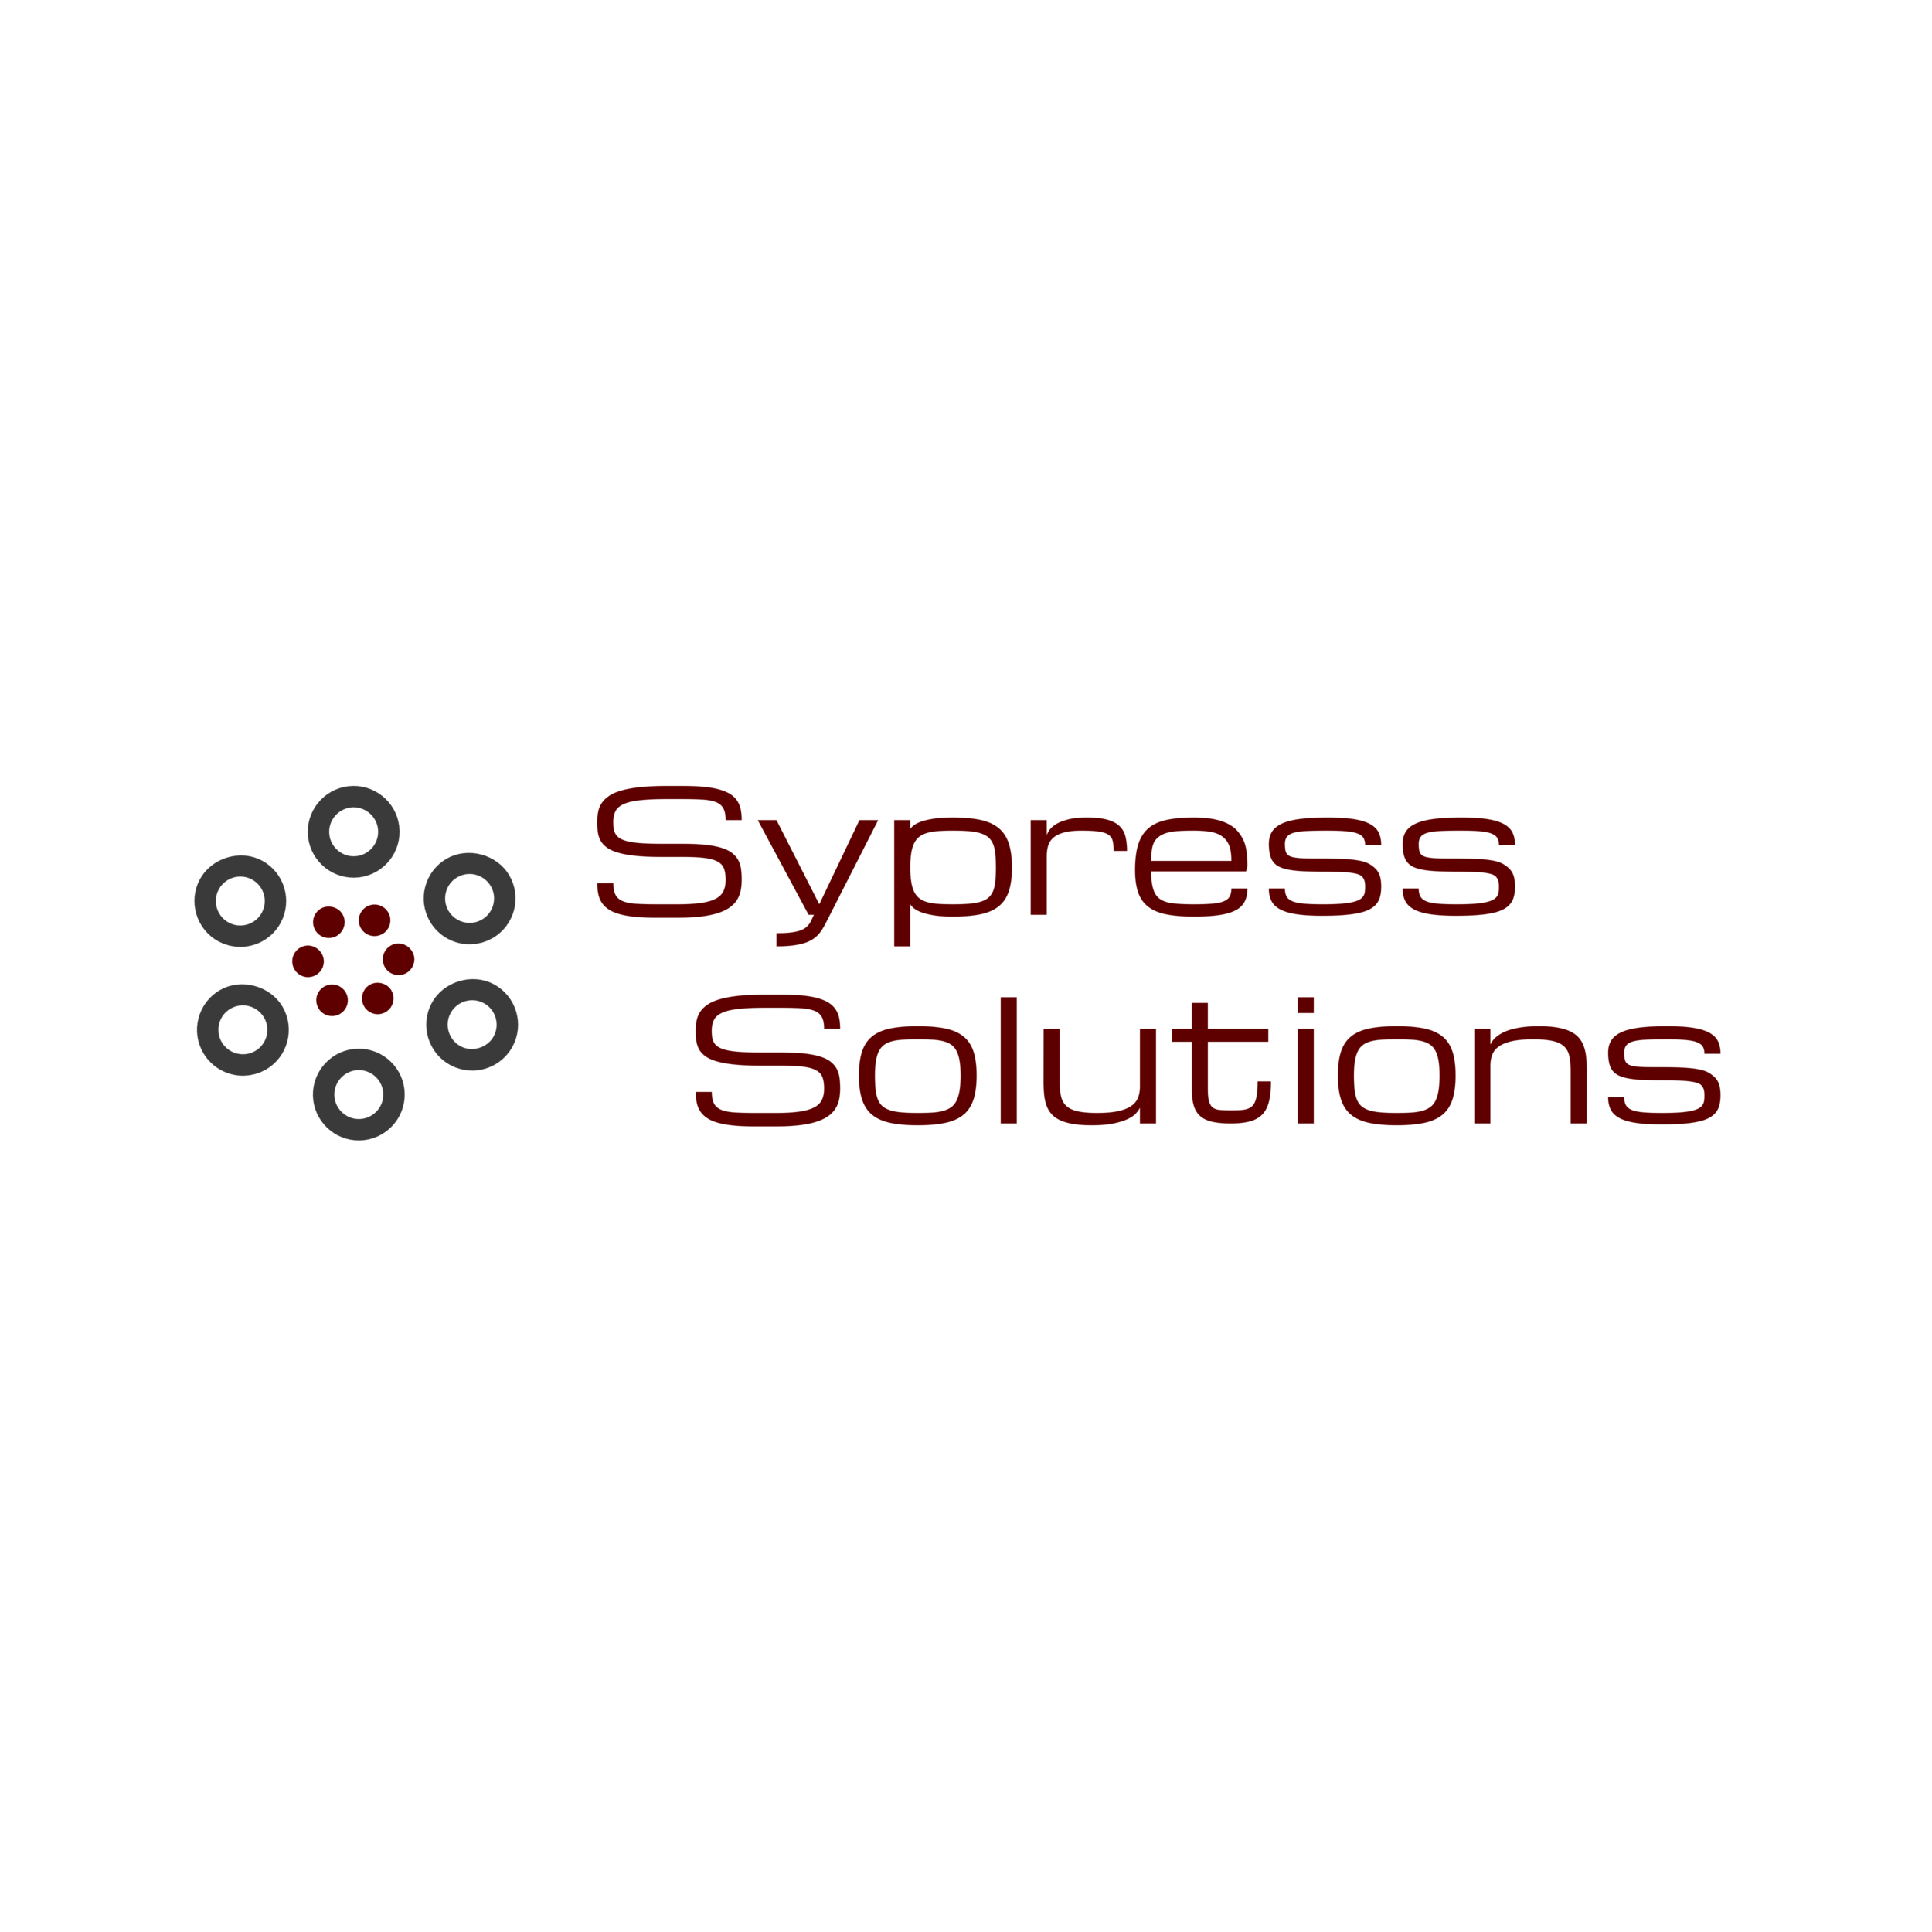 Sypress Solutions